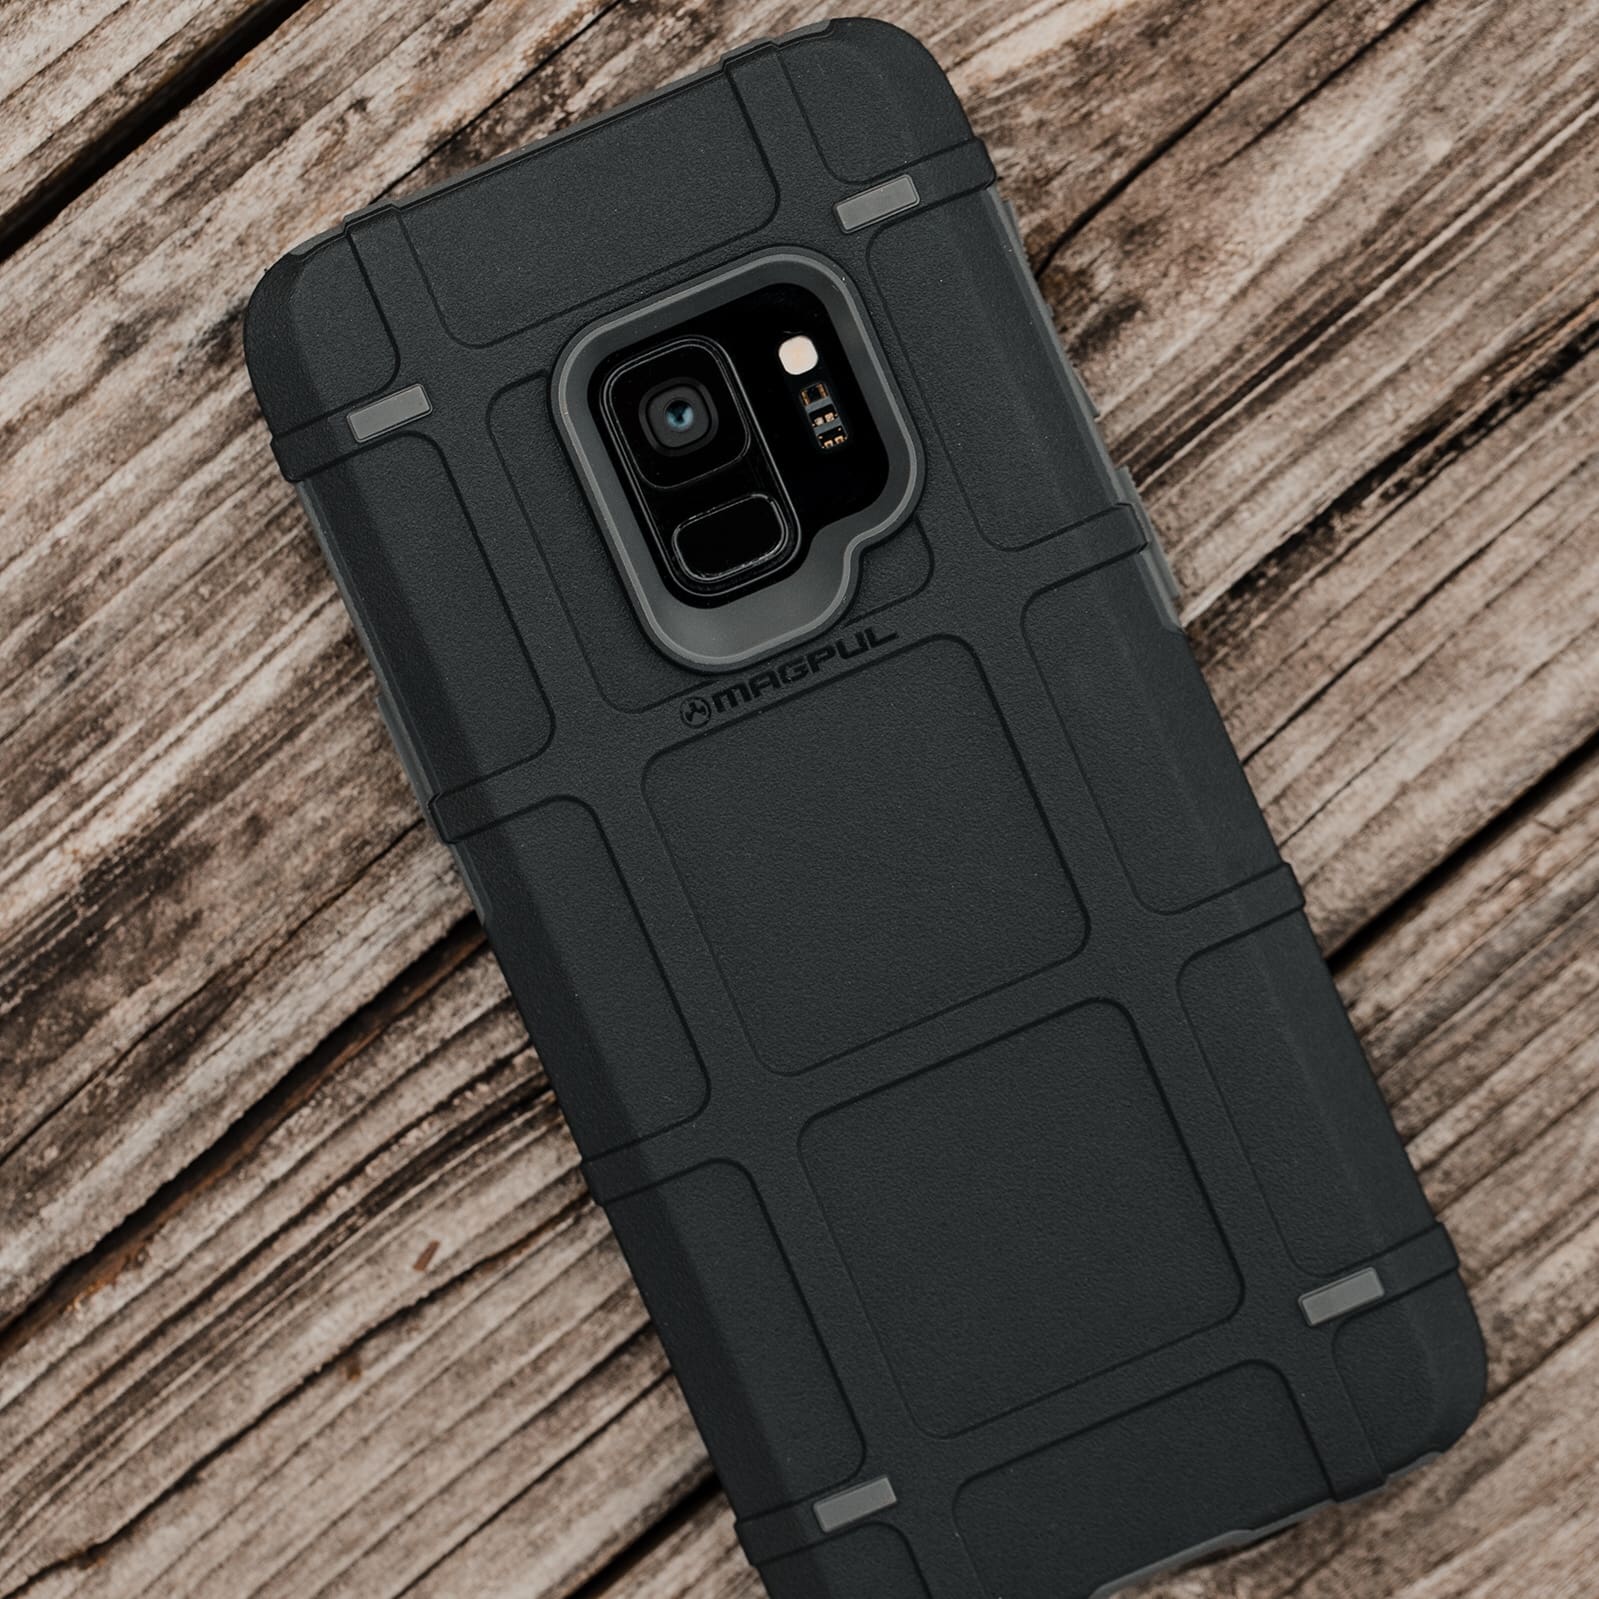 Magpul Announces Iphone 7 8 7 8 Samsung S 9 S9 Bump Cases Along With Mp5 Hk94 Products Soldier Systems Daily